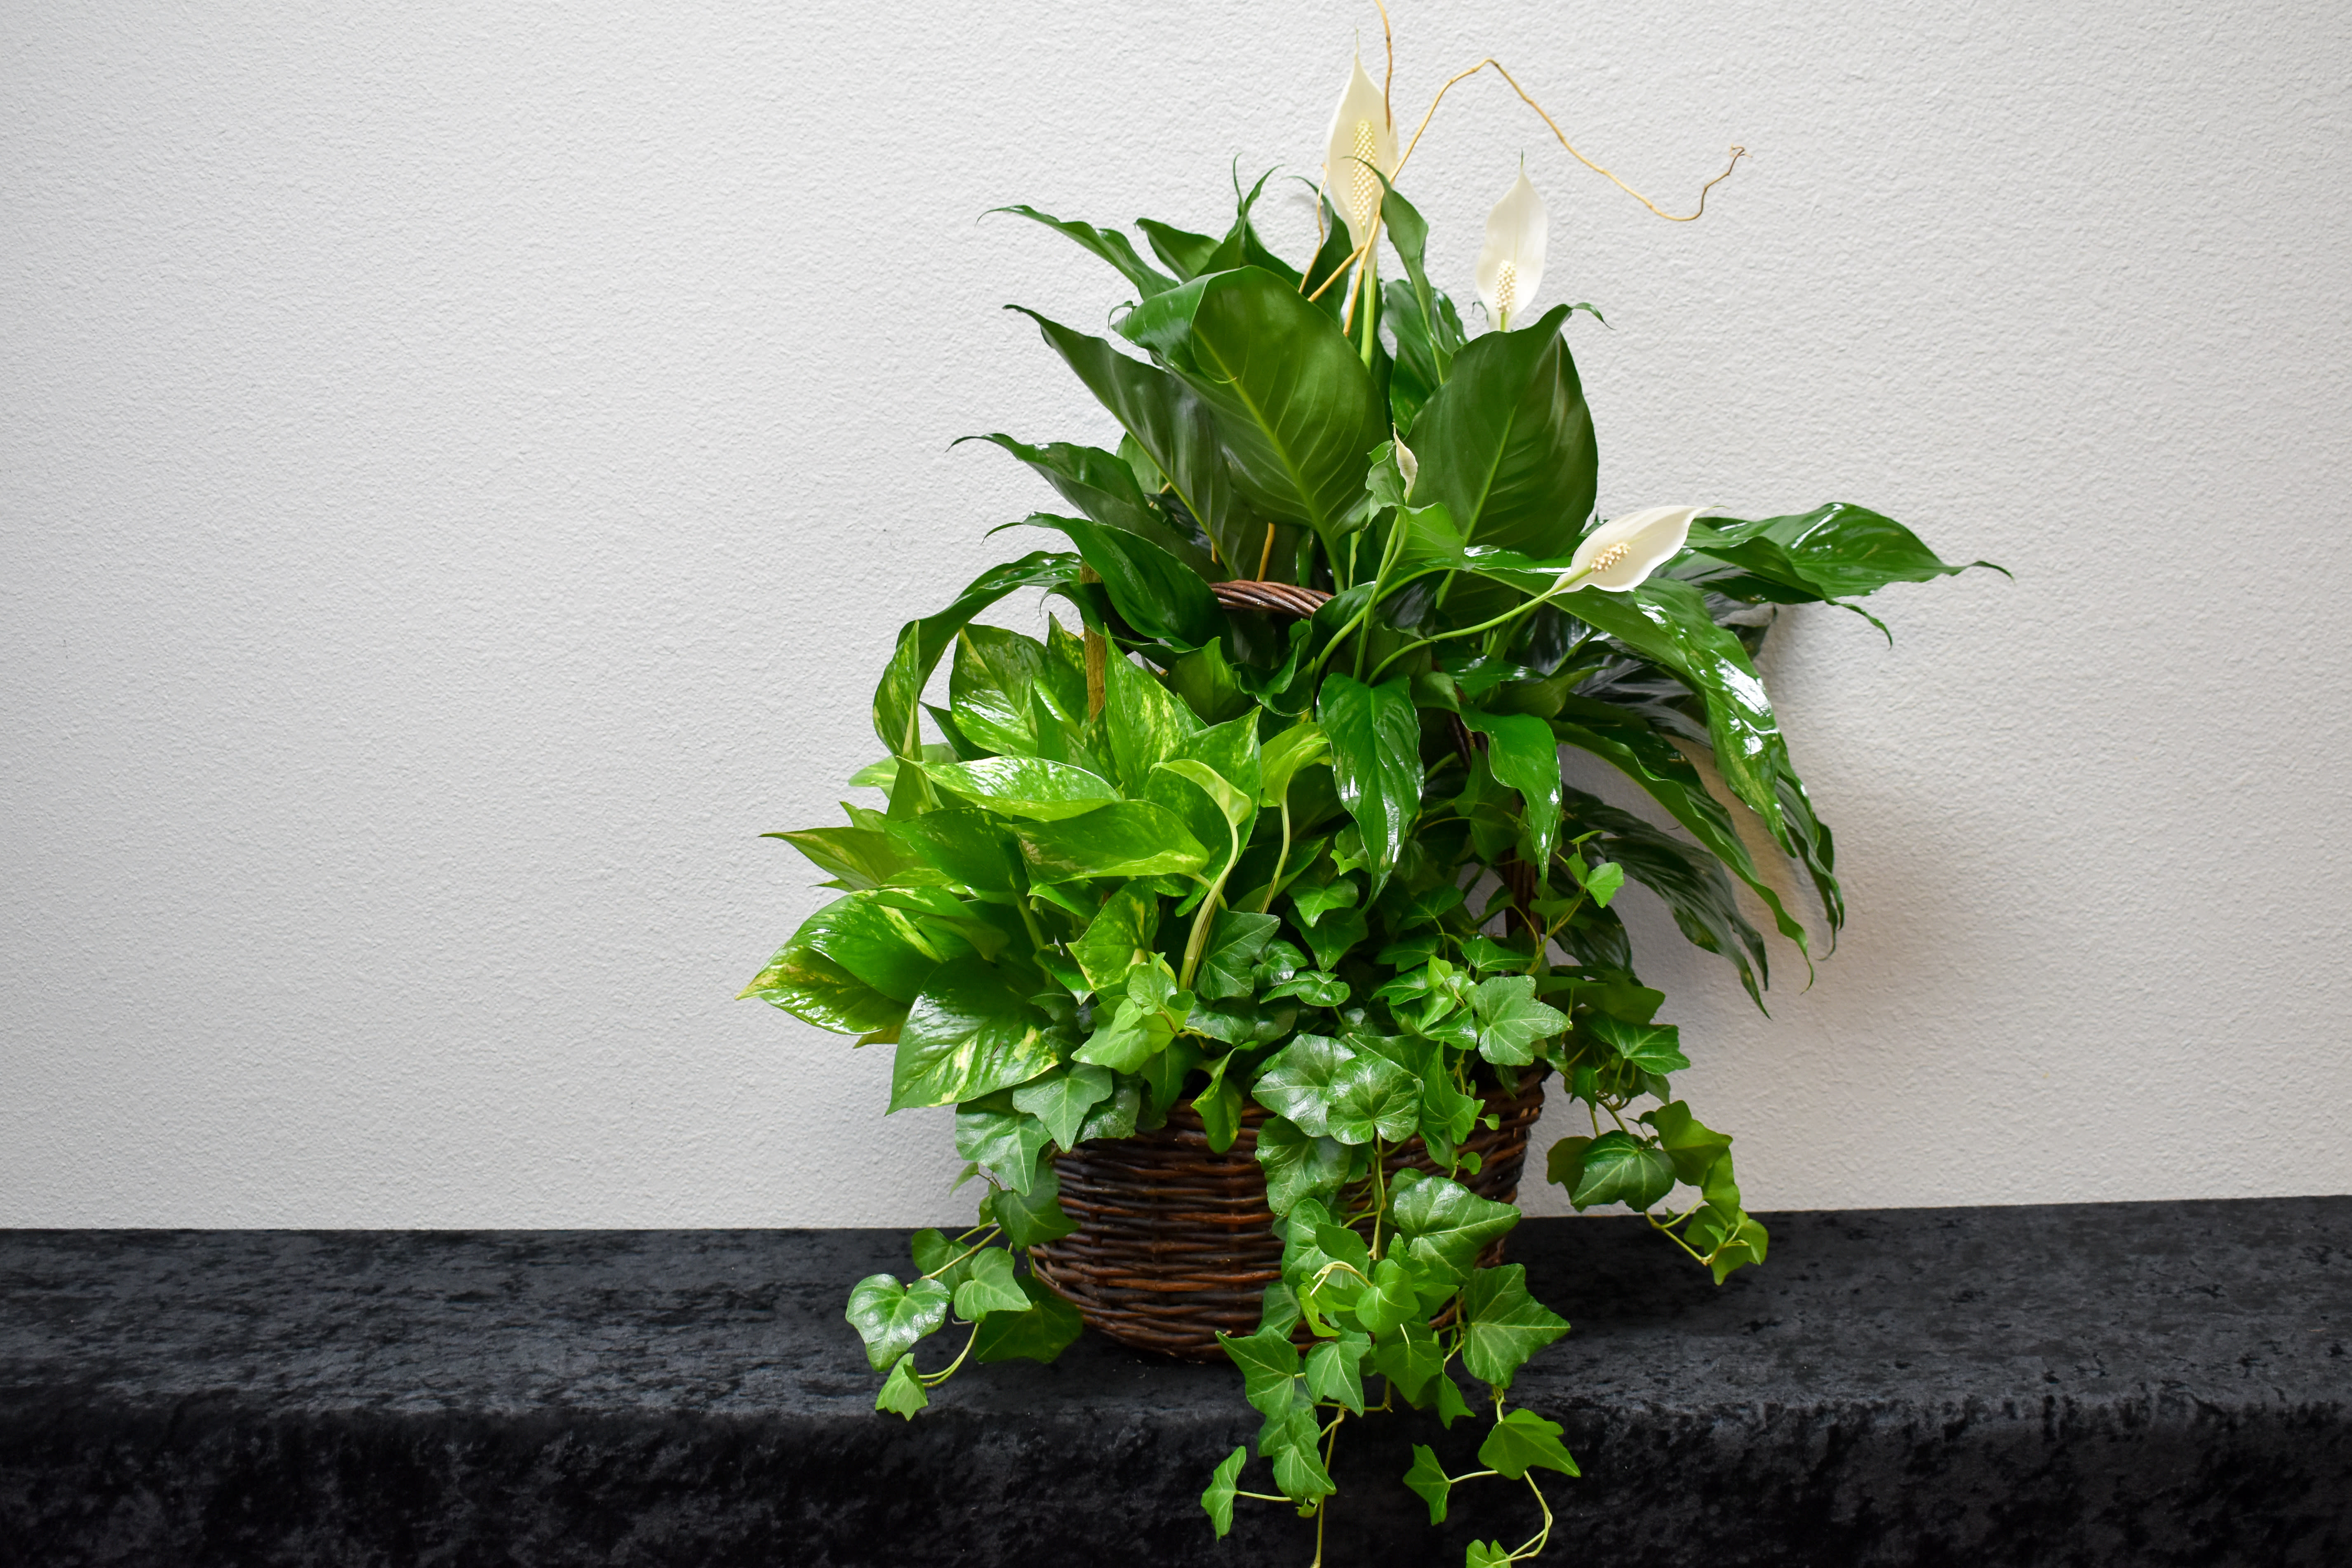 Large Combo Planter - Item # TLS-101LG Ivy Spath and other seasonal plants make for a beautiful and large assortment of green plants adorned with Curly Willow branches.